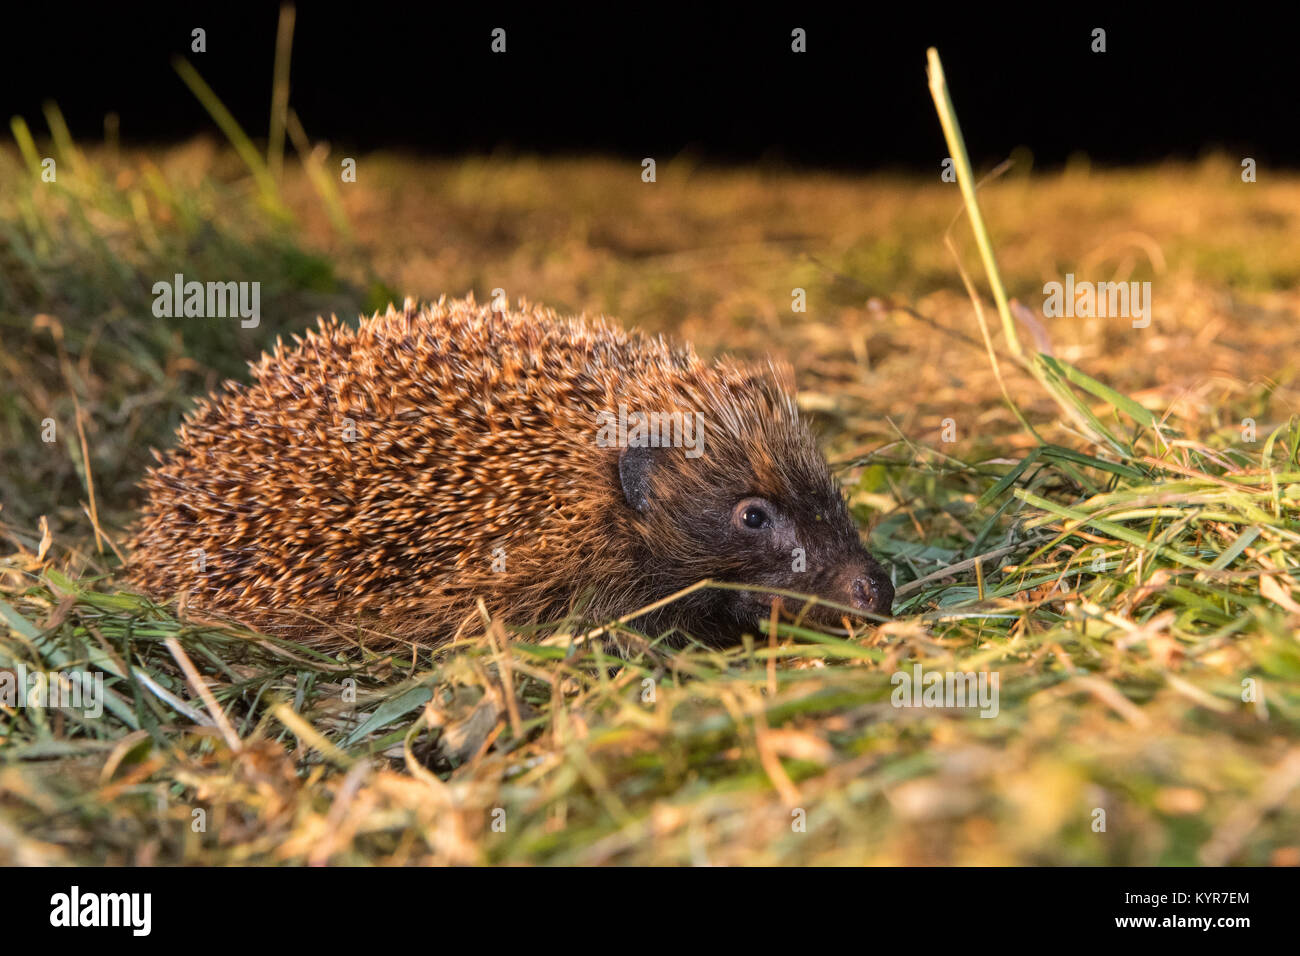 A Common Hedgehog, Erinaceus europaeus, found in hay meadow after harvesting at nightime. North Yorkshire, UK. Stock Photo